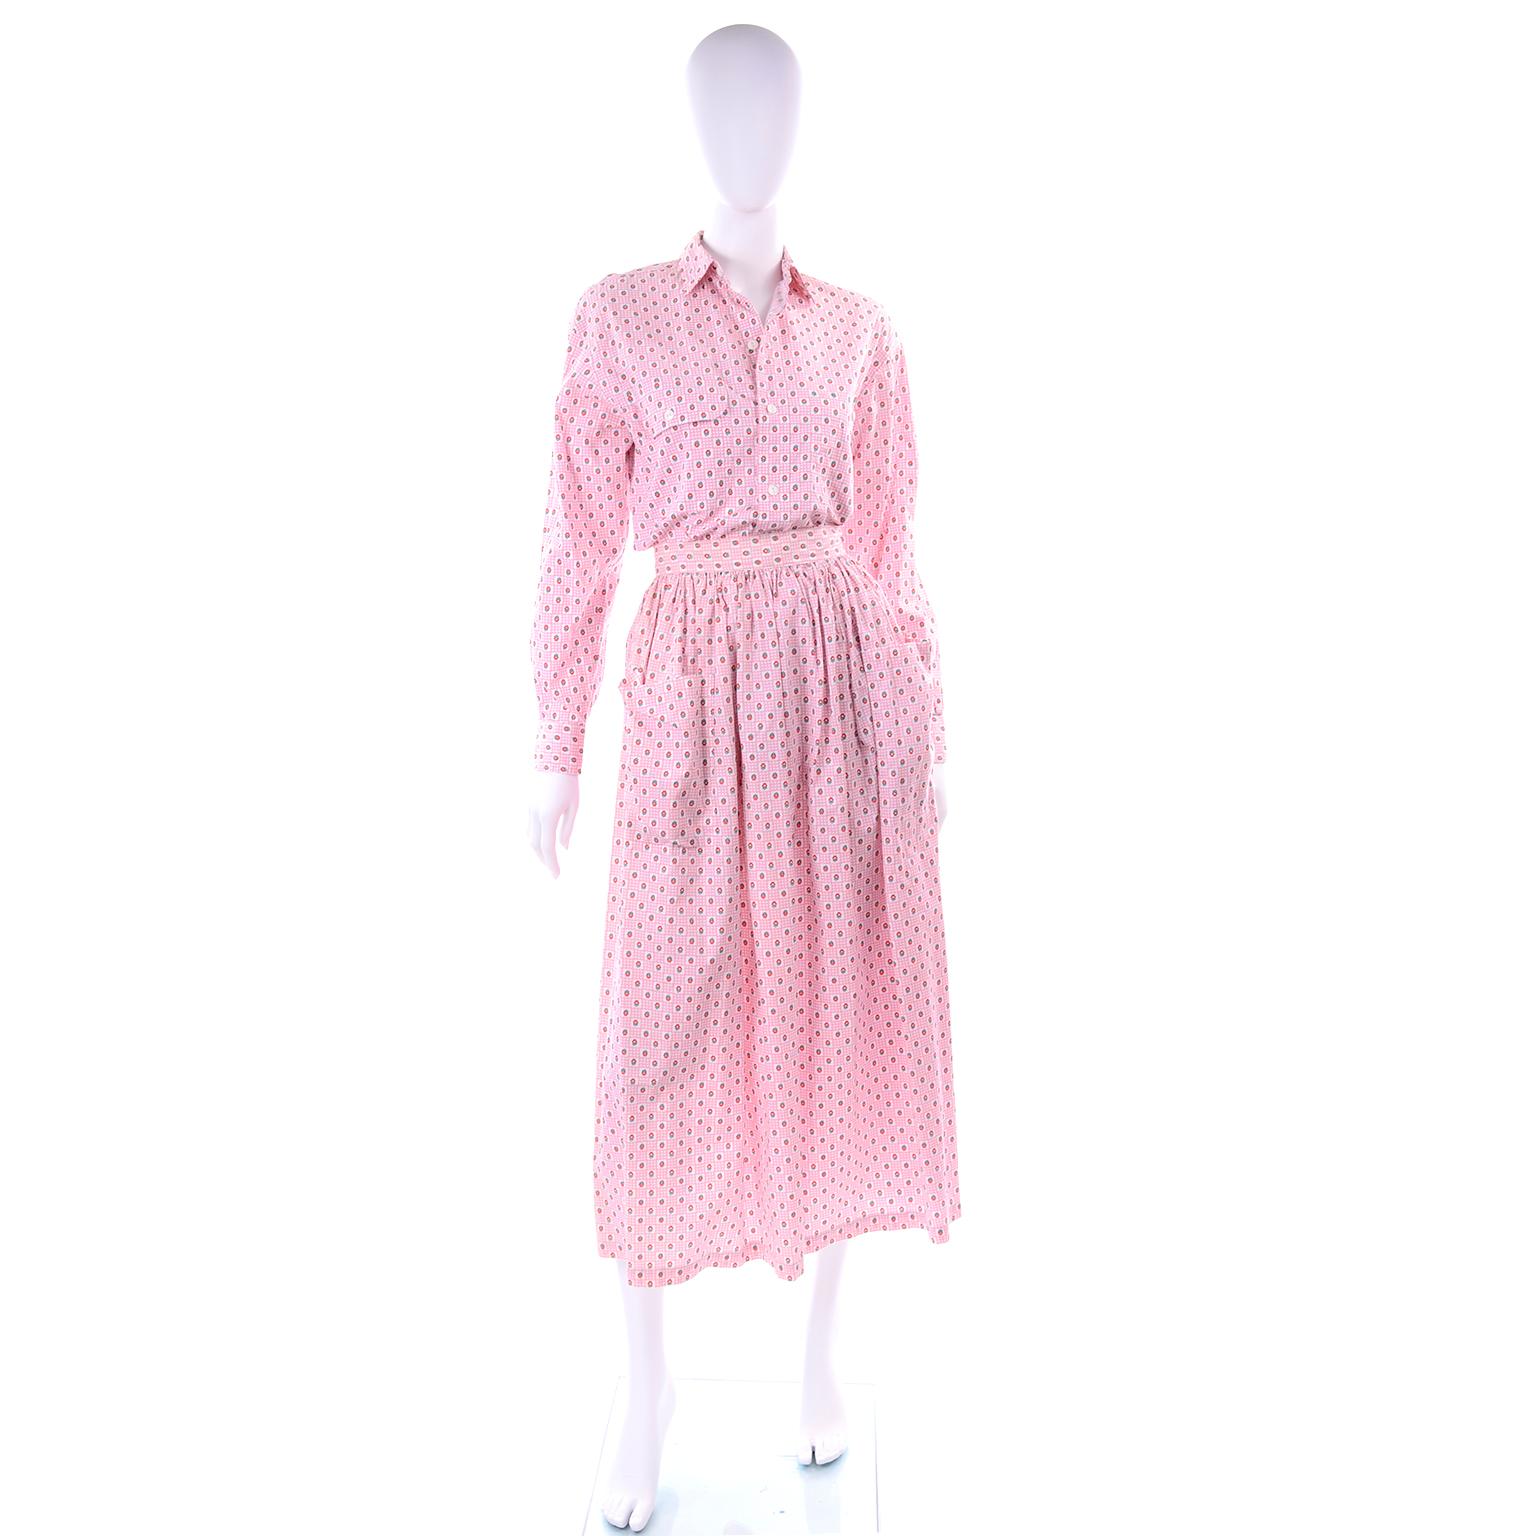 This is a pretty vintage 2 piece dress outfit from Ralph Lauren in a pink floral cotton print.  The outfit is new with original tags attached and includes a button front blouse and a skirt with 2 front pockets. The skirt closes with a zipper and